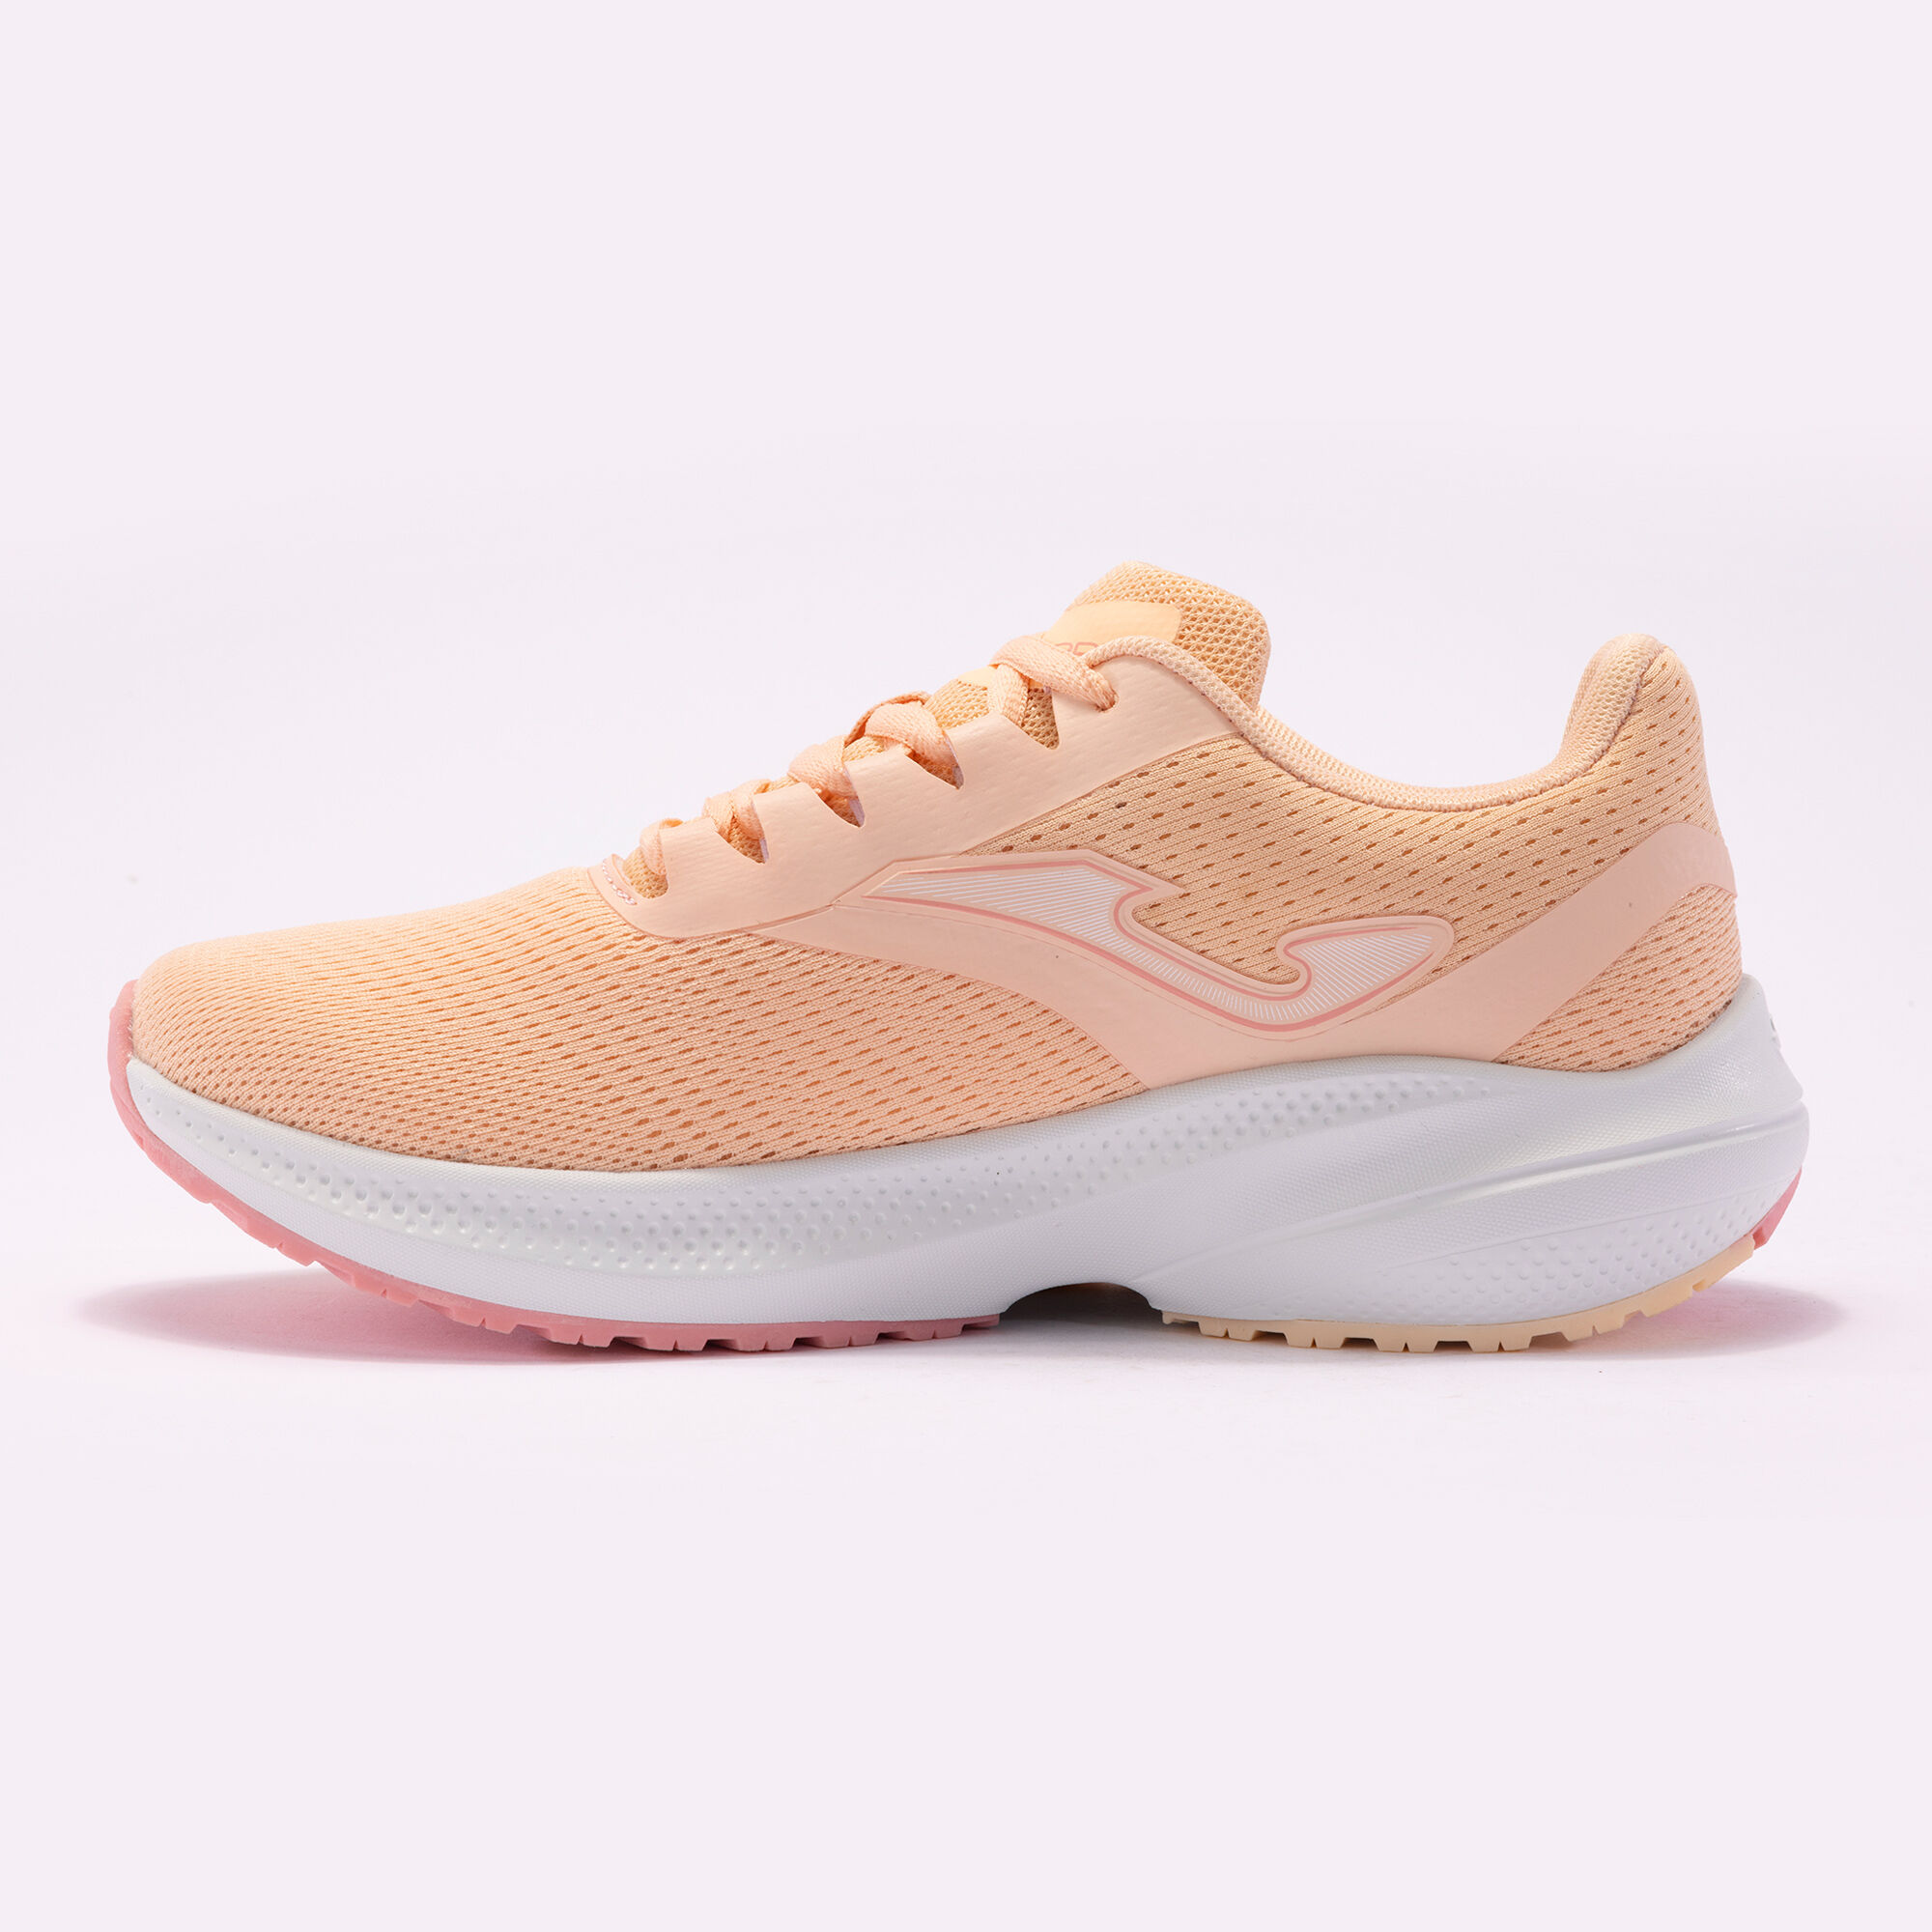 Sapatilhas running Rodio Lady 24 mulher rosa